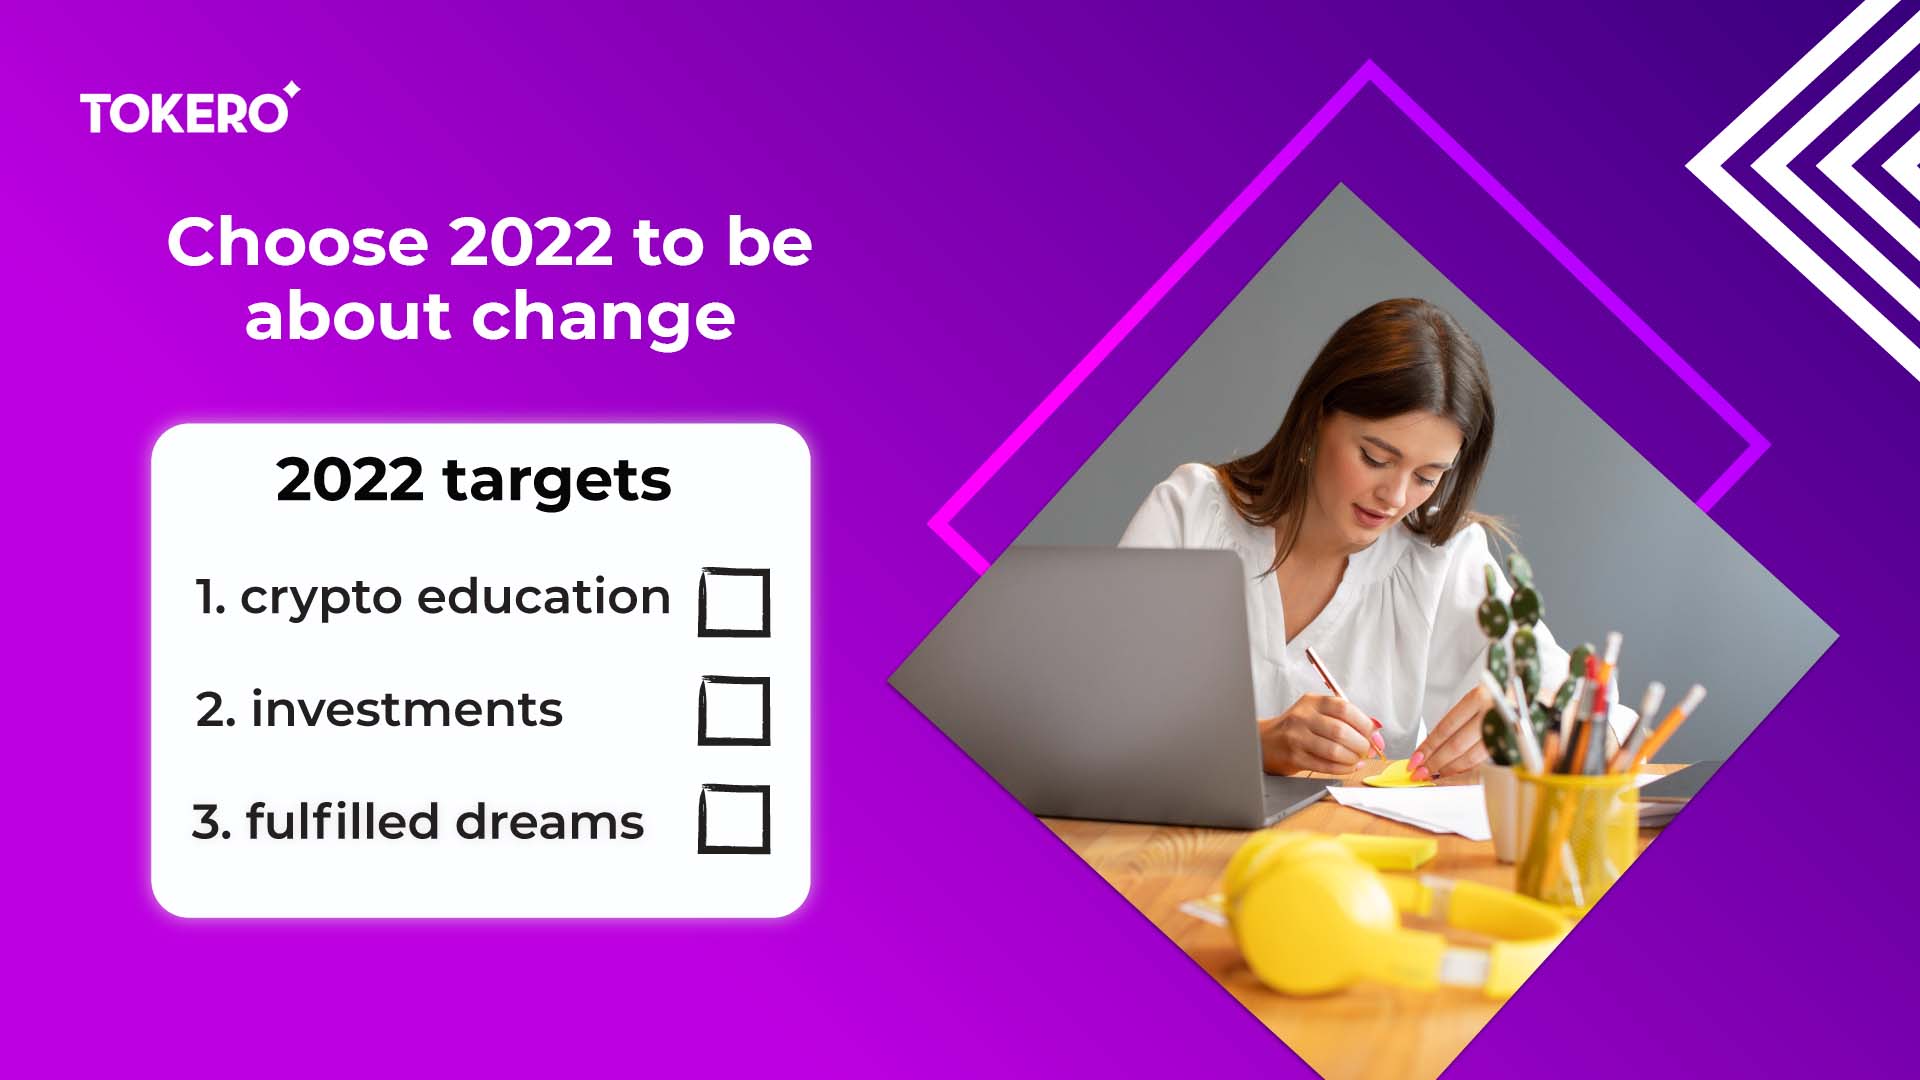 Choose 2022 to be about change